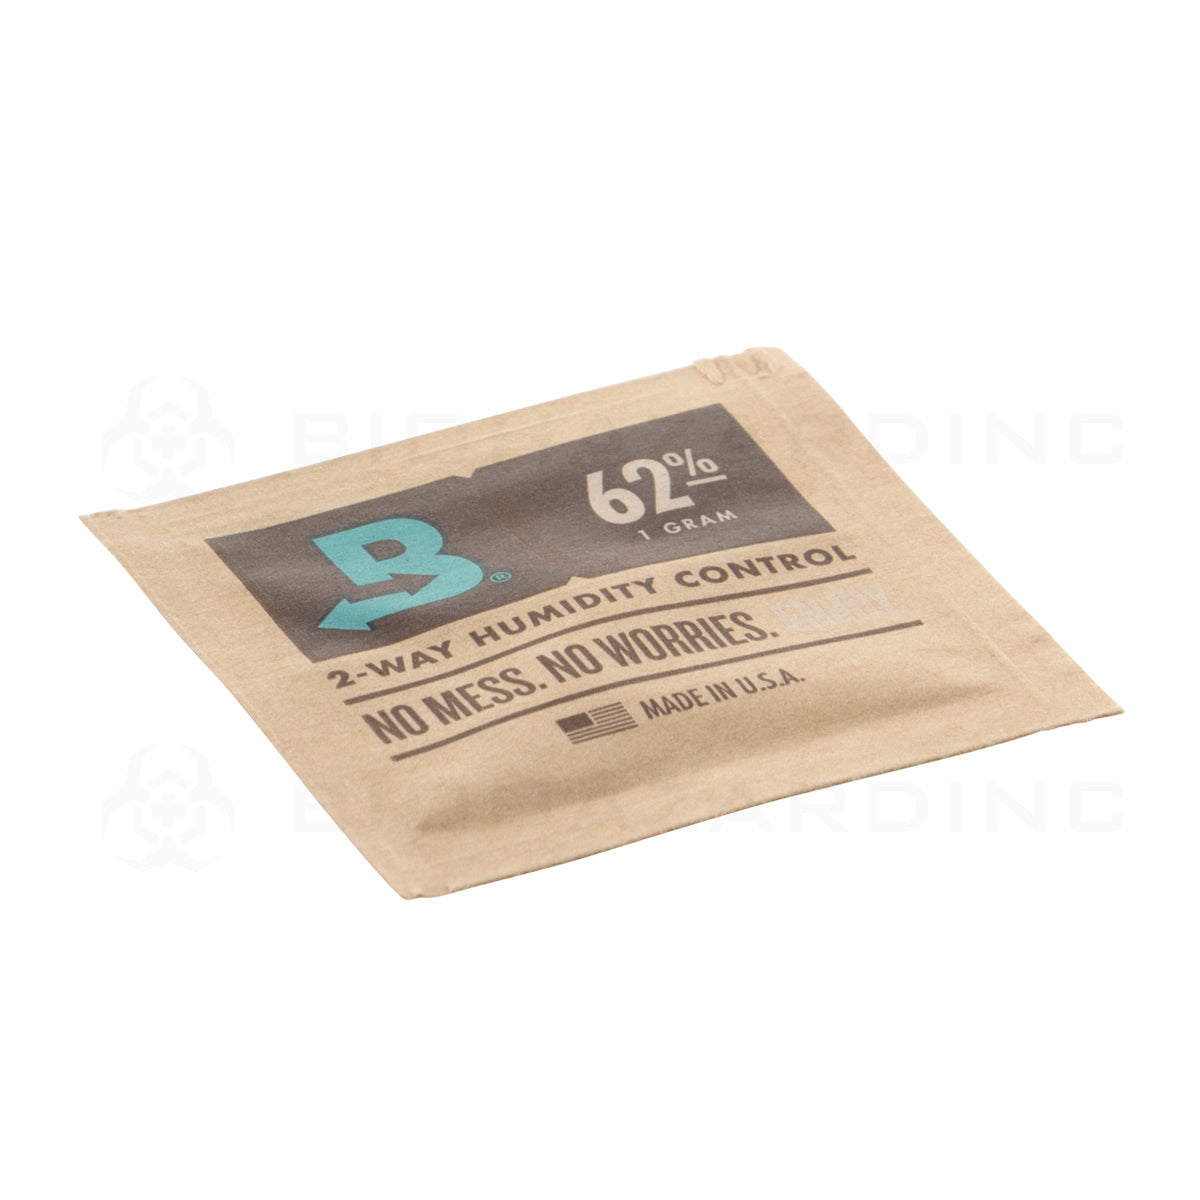 Boveda® | Humidity Control Packs | 1g - 62% - 1500 Count Humidity Pack Boveda   